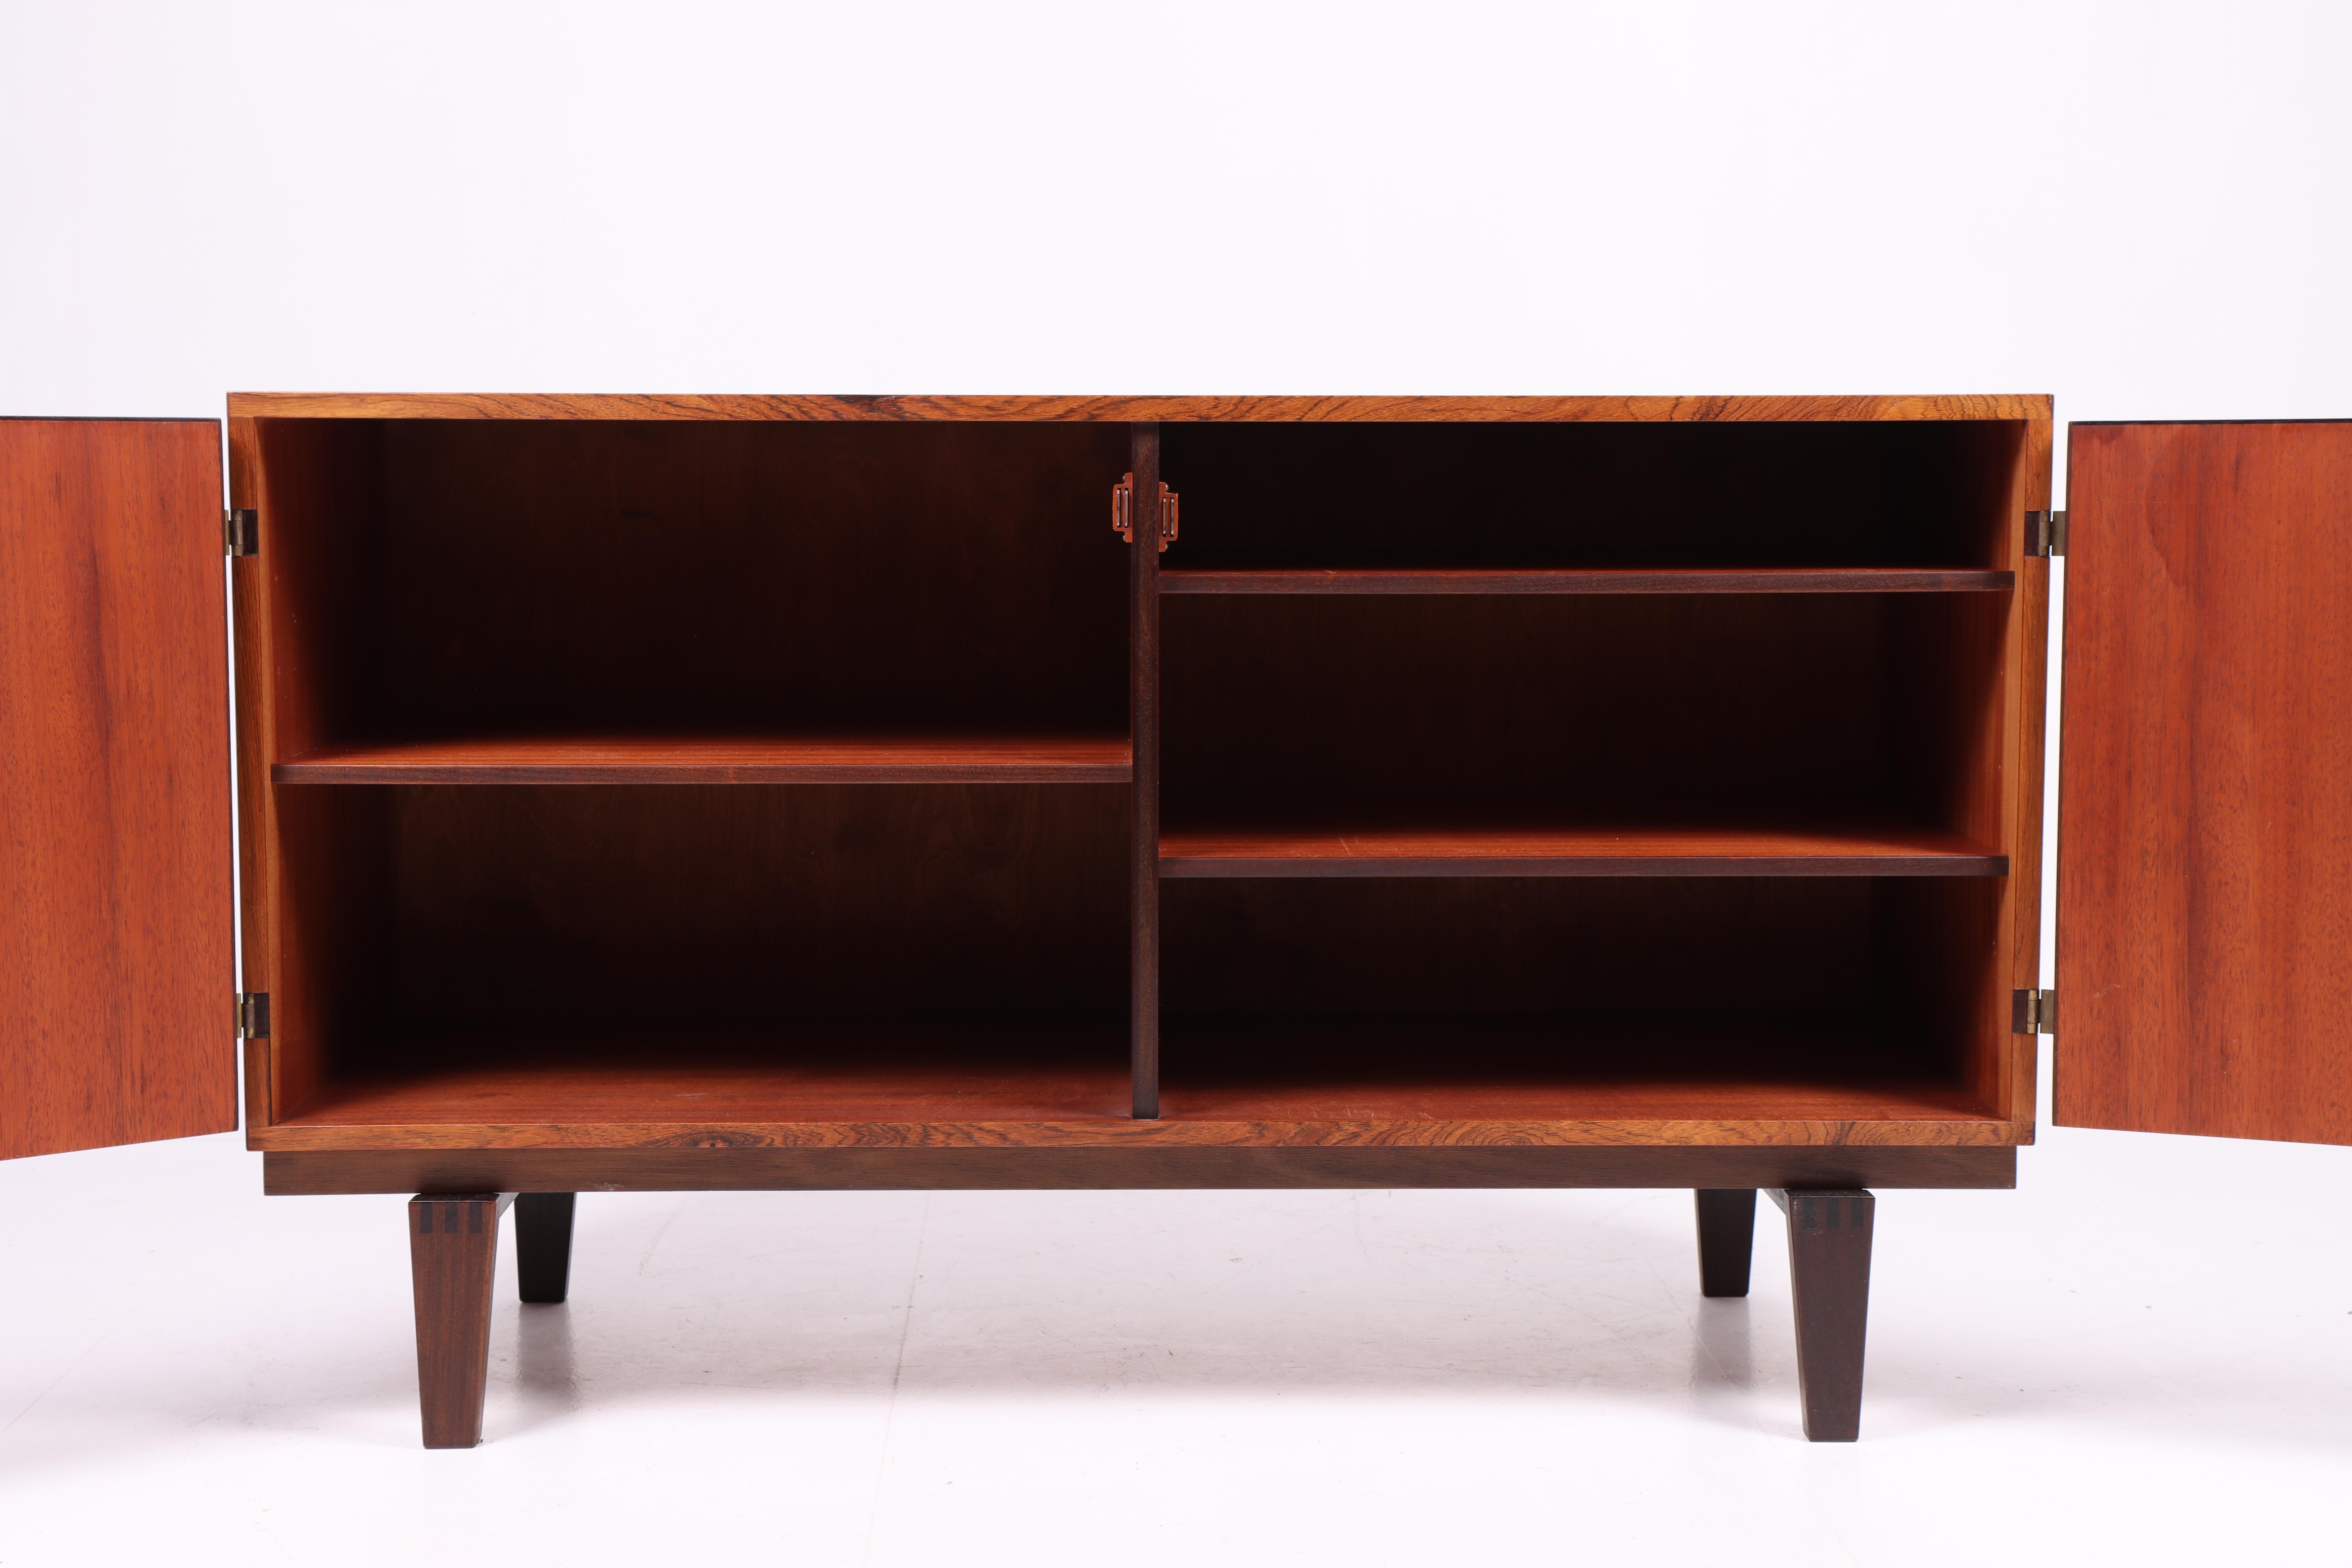 Scandinavian Modern Midcentury Low Cabinet in Rosewood with Brass Hardware by Løgvig, Denmark, 1960s For Sale